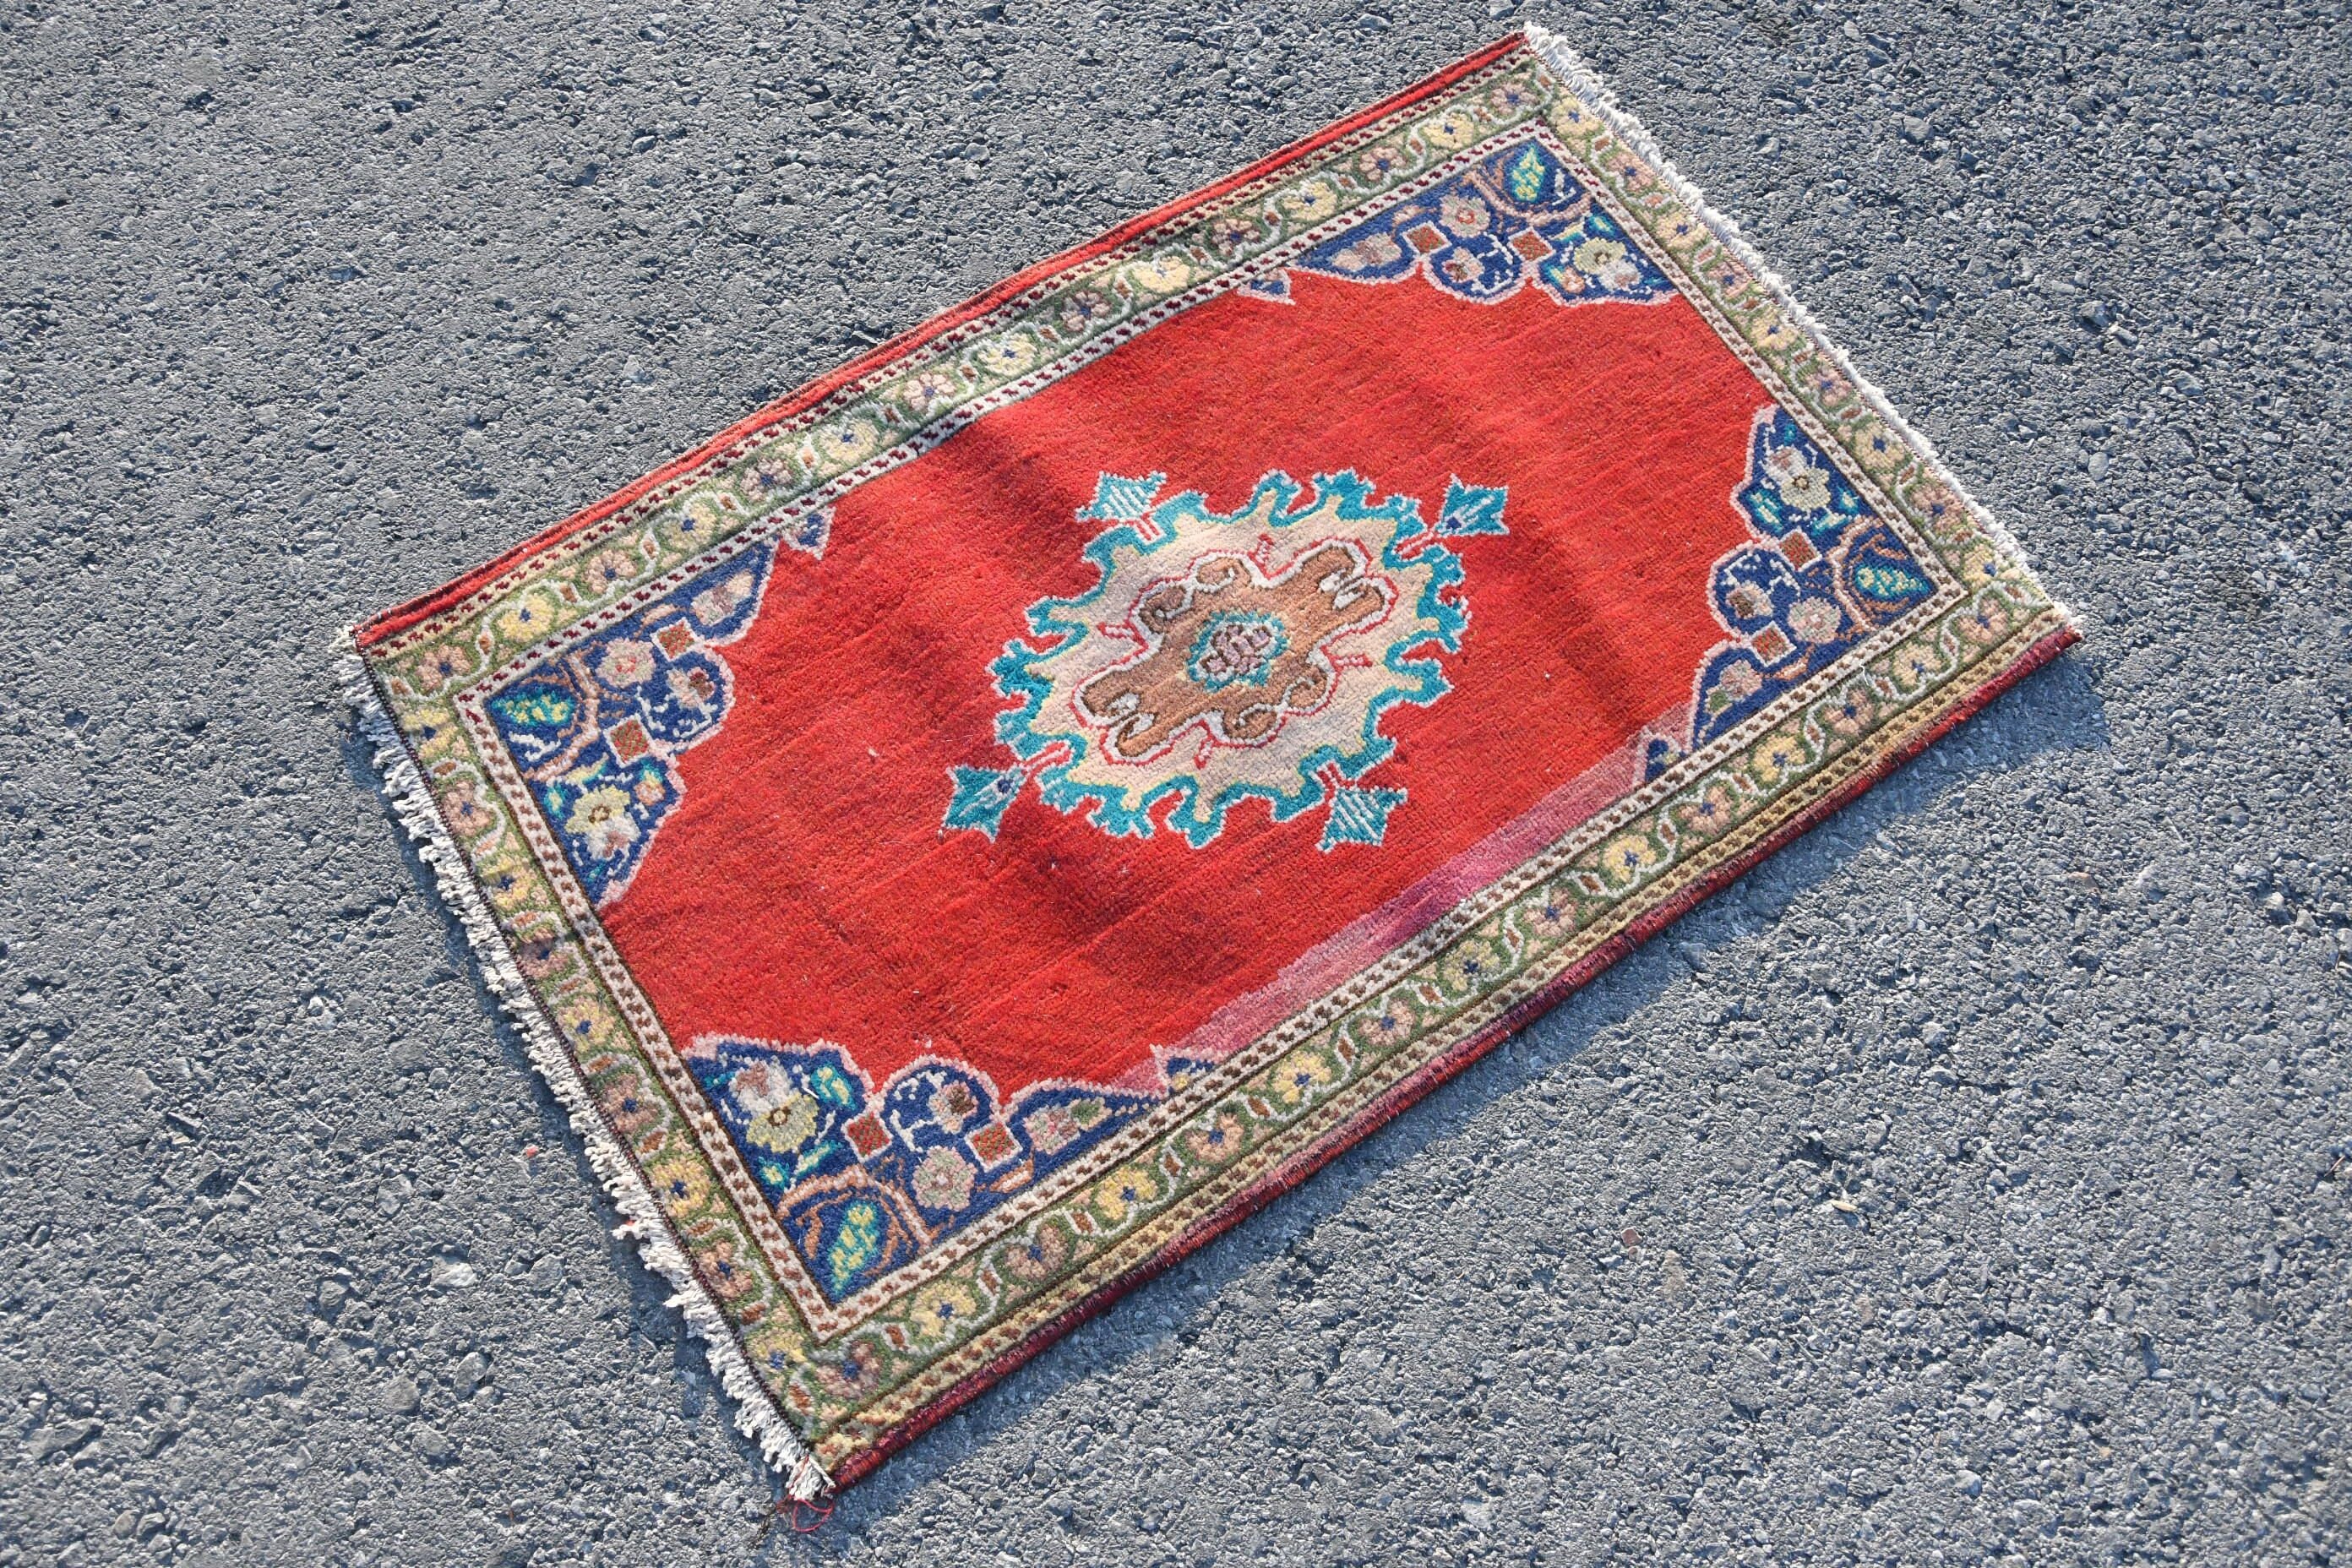 Wall Hanging Rug, Vintage Rugs, Car Mat Rugs, 1.7x2.7 ft Small Rugs, Handwoven Rug, Turkish Rug, Rugs for Kitchen, Wool Rug, Oriental Rug